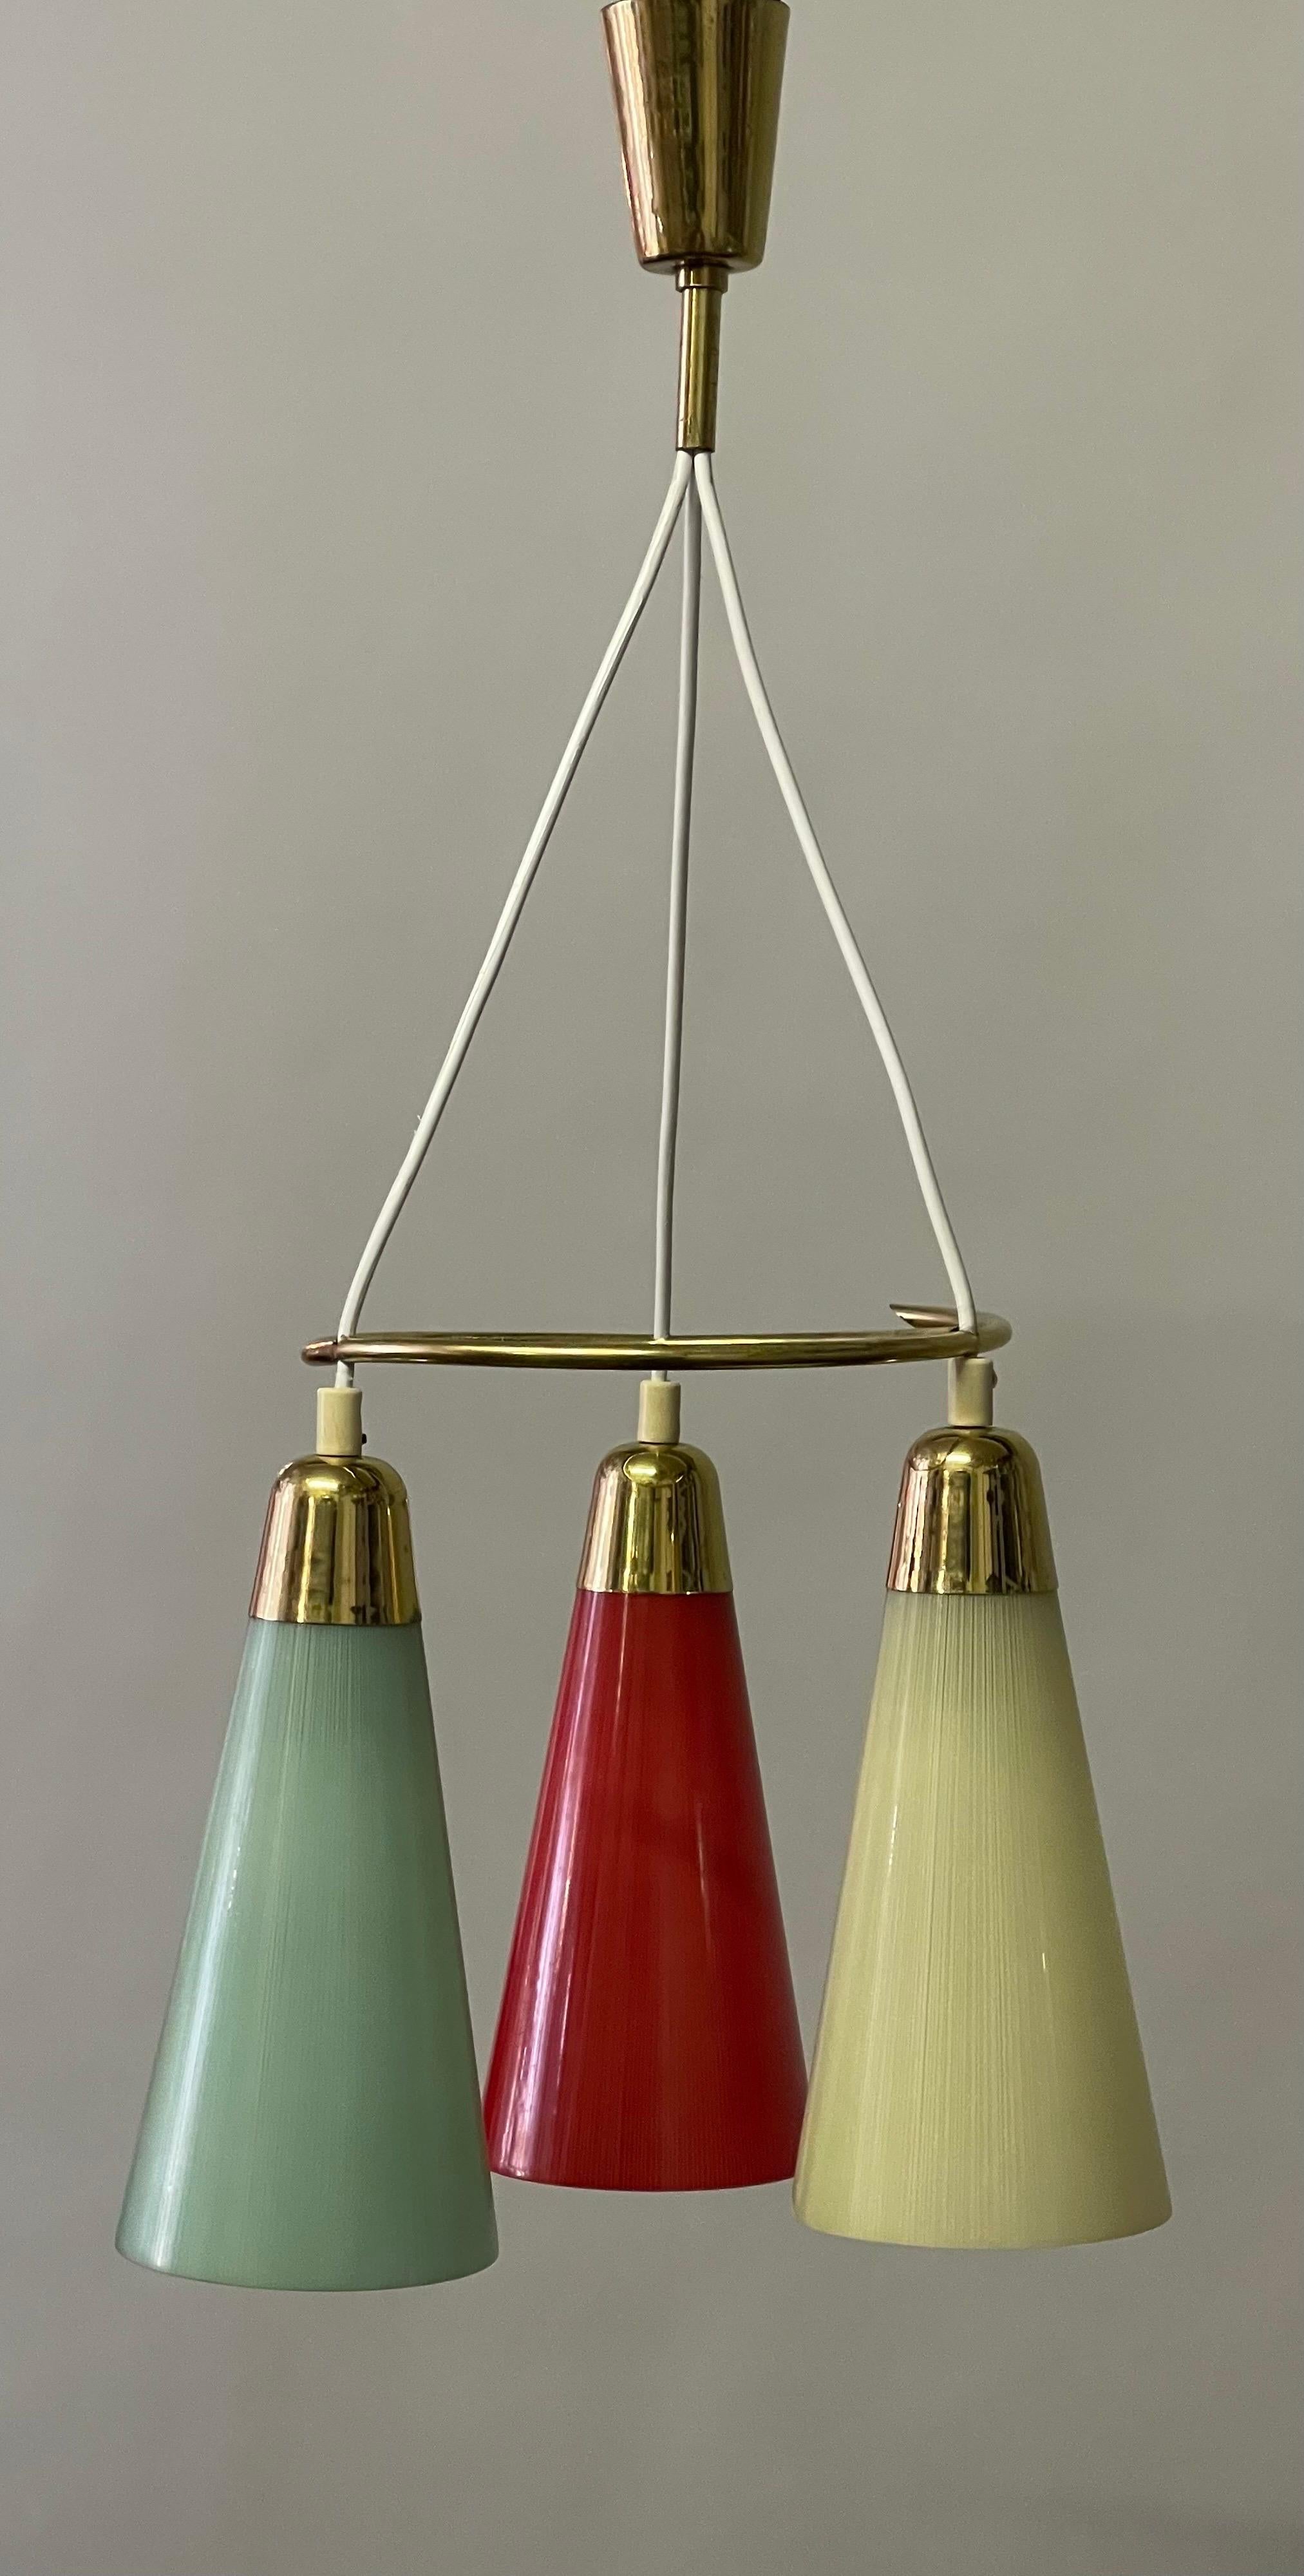 Stilnovo Style Polished Brass and Multicolor Glass Pendant, circa 1950s For Sale 4